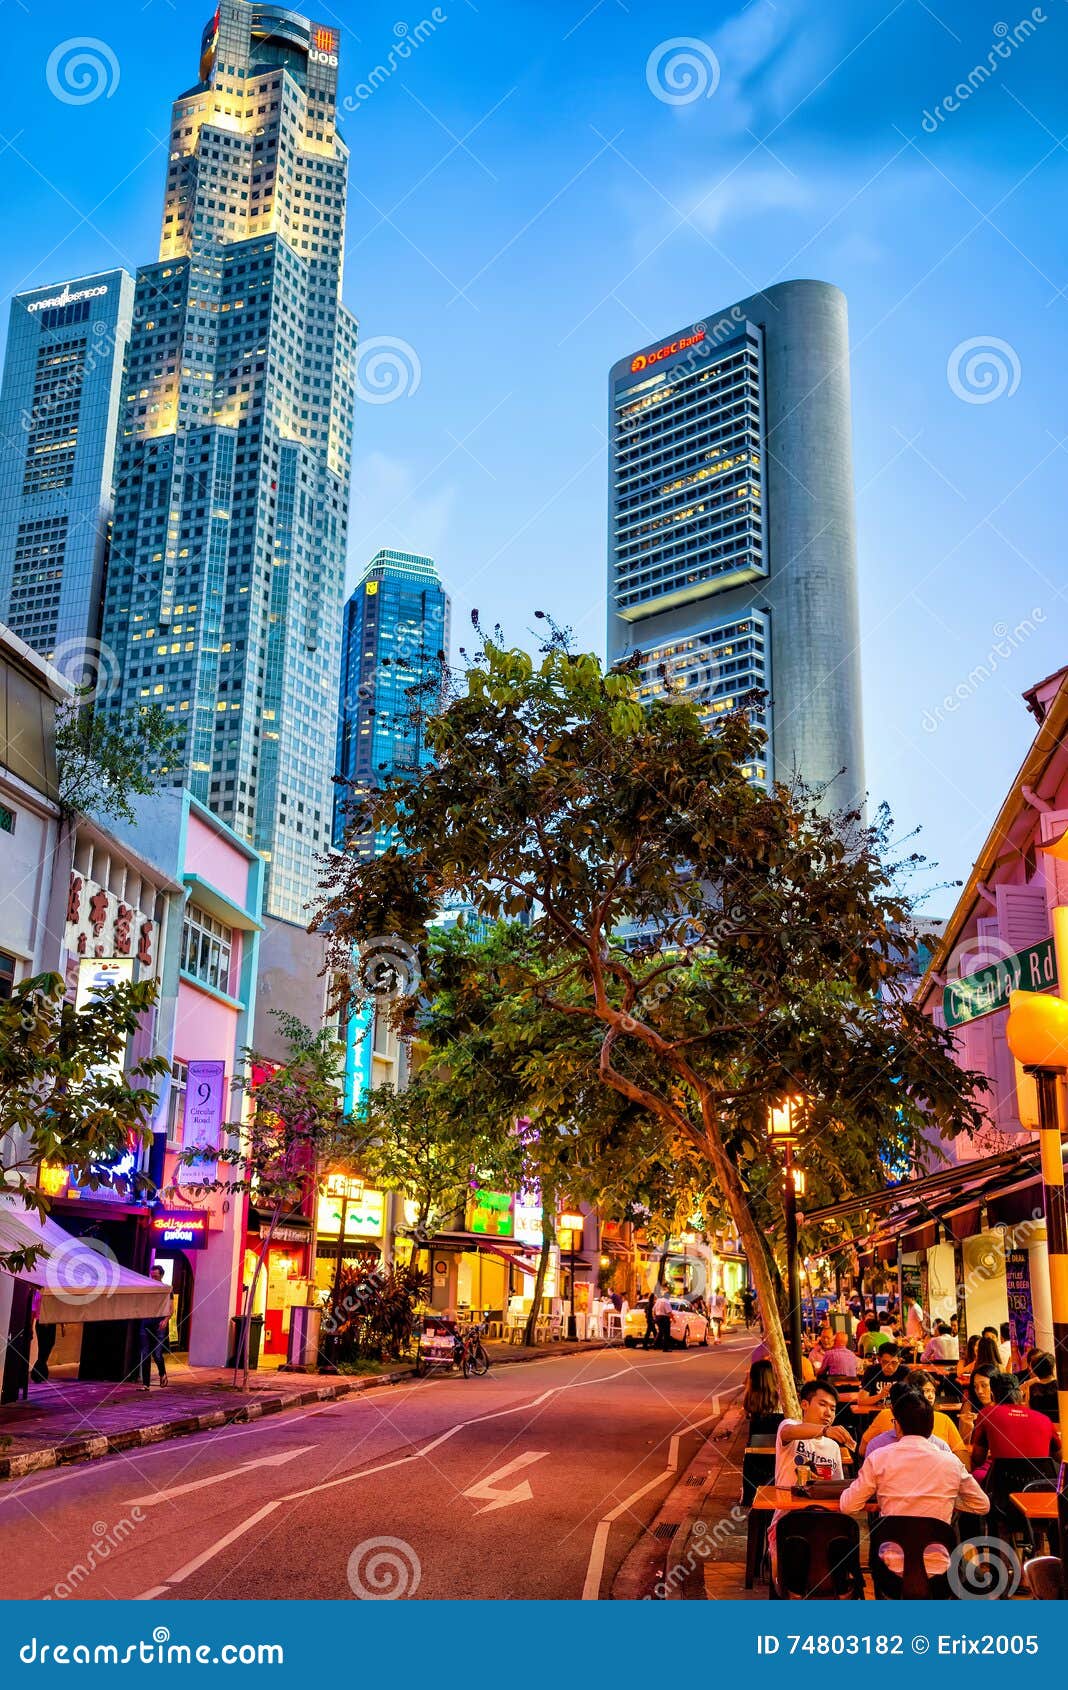 boat quay district and uob plaza of singapore editorial